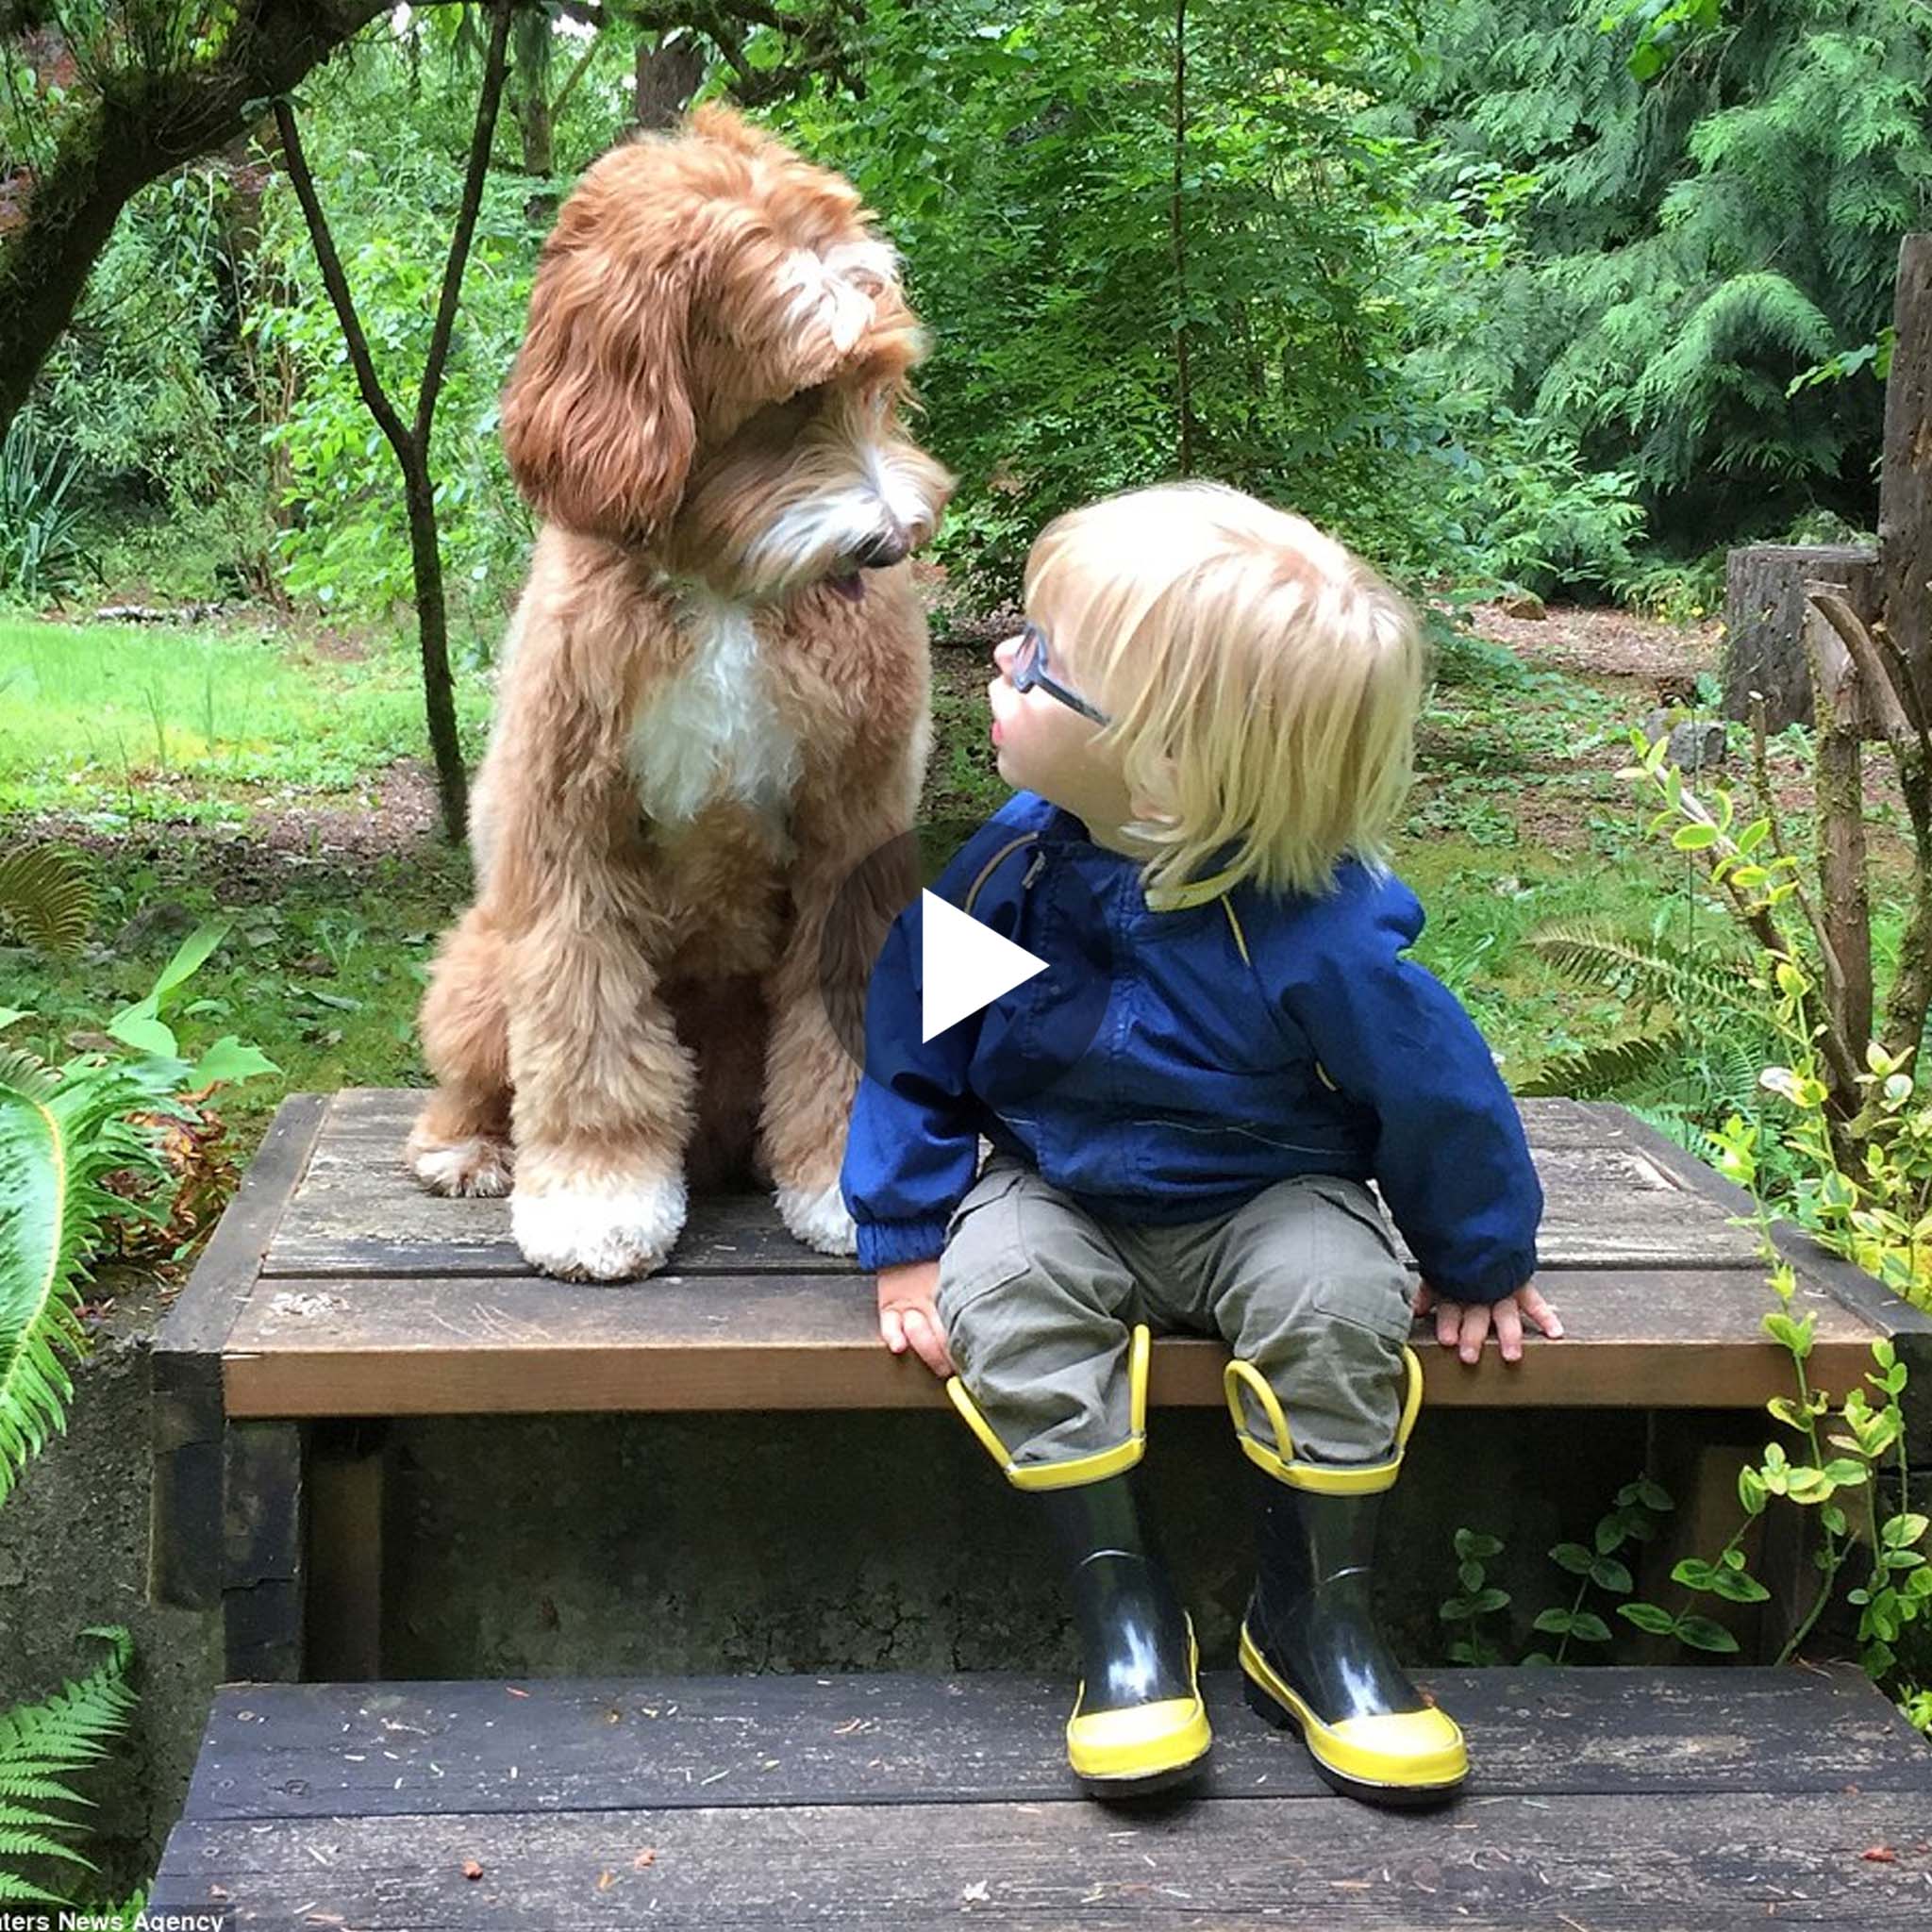 “When a Foster Mother Introduces Her Child to a Dog, an Enchanting Unbreakable Bond Blossoms.”